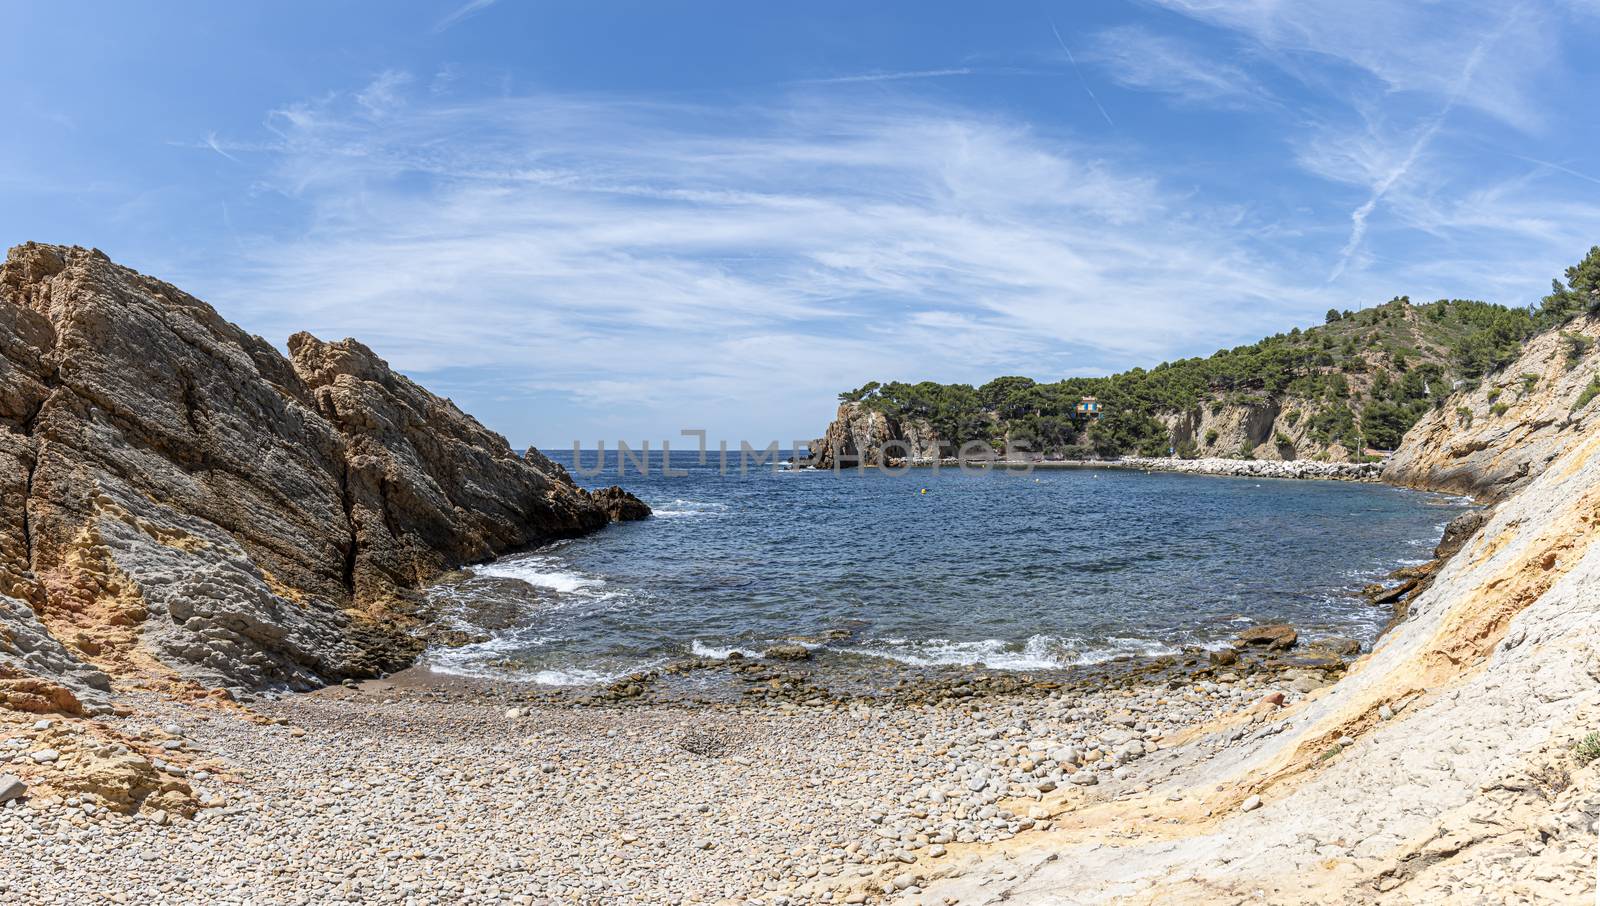 panoramic view of the bay and pebble beach of Calanques of Figuieres, creek of Figuieres and Figuières Cove in Méjean, South of France, Europe